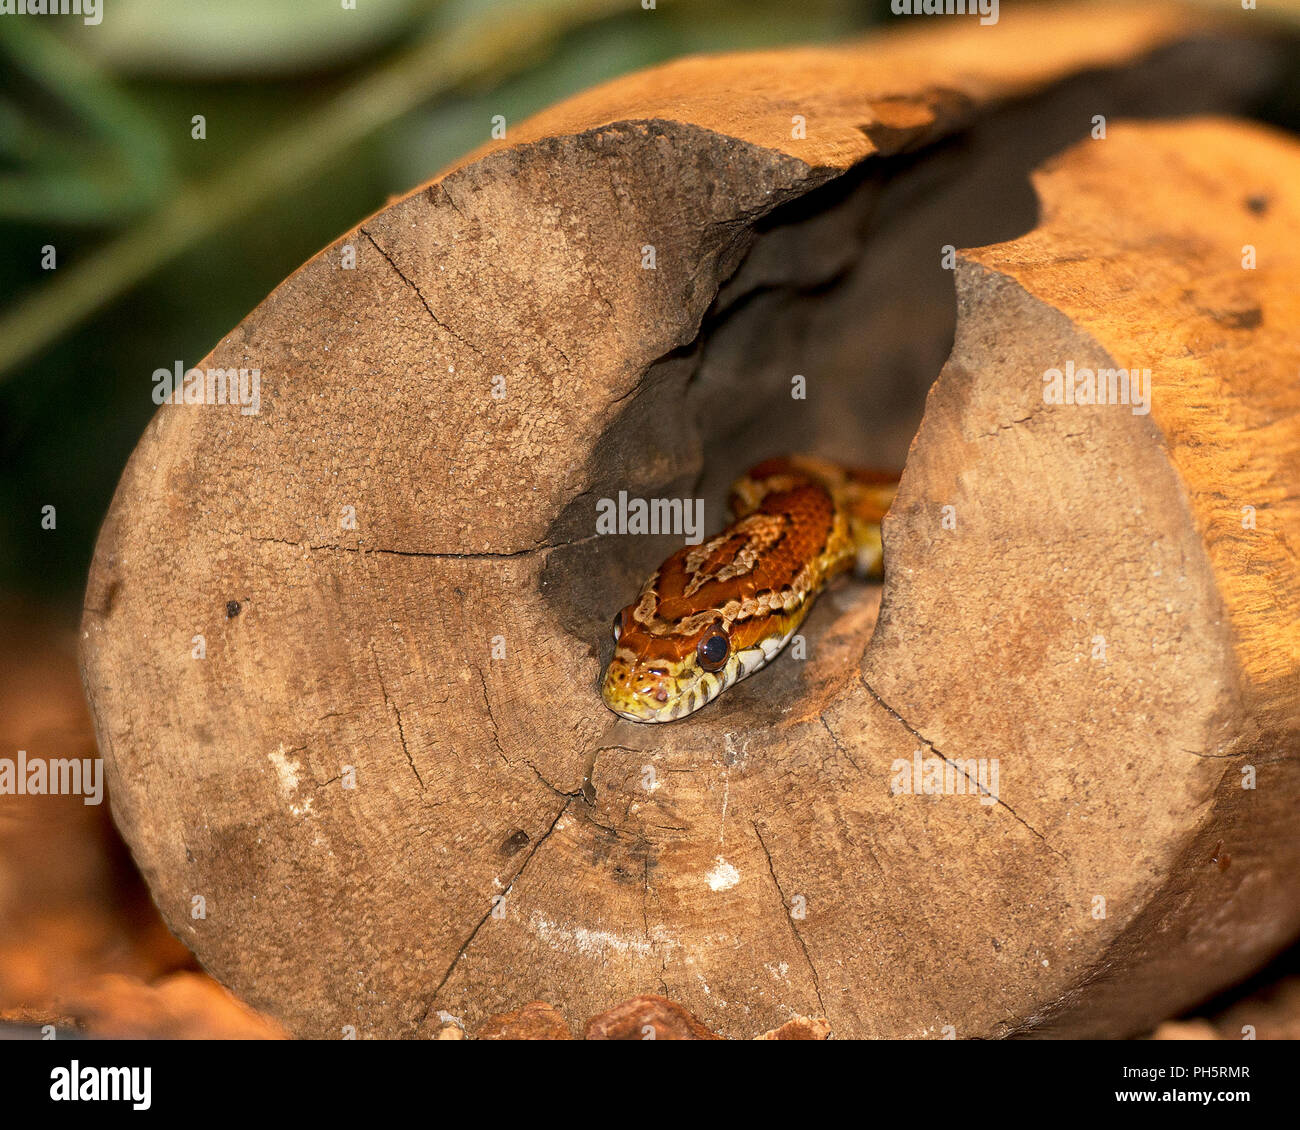 Snake in its surrounding and environment. Stock Photo